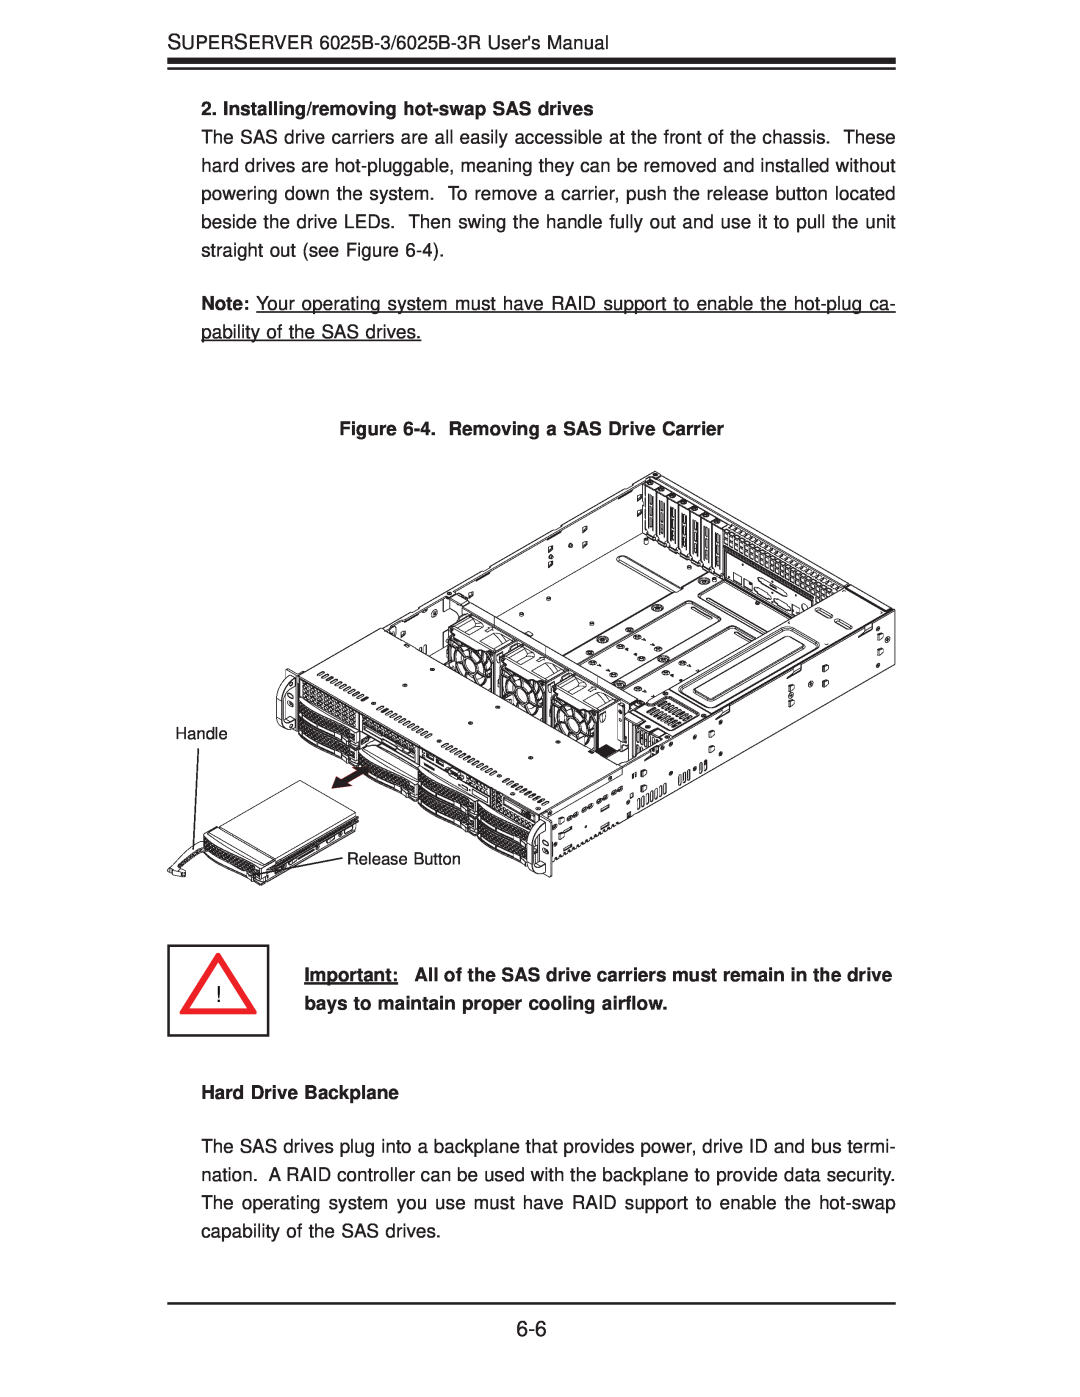 SUPER MICRO Computer 6025B-3R user manual Installing/removing hot-swap SAS drives, 4. Removing a SAS Drive Carrier 